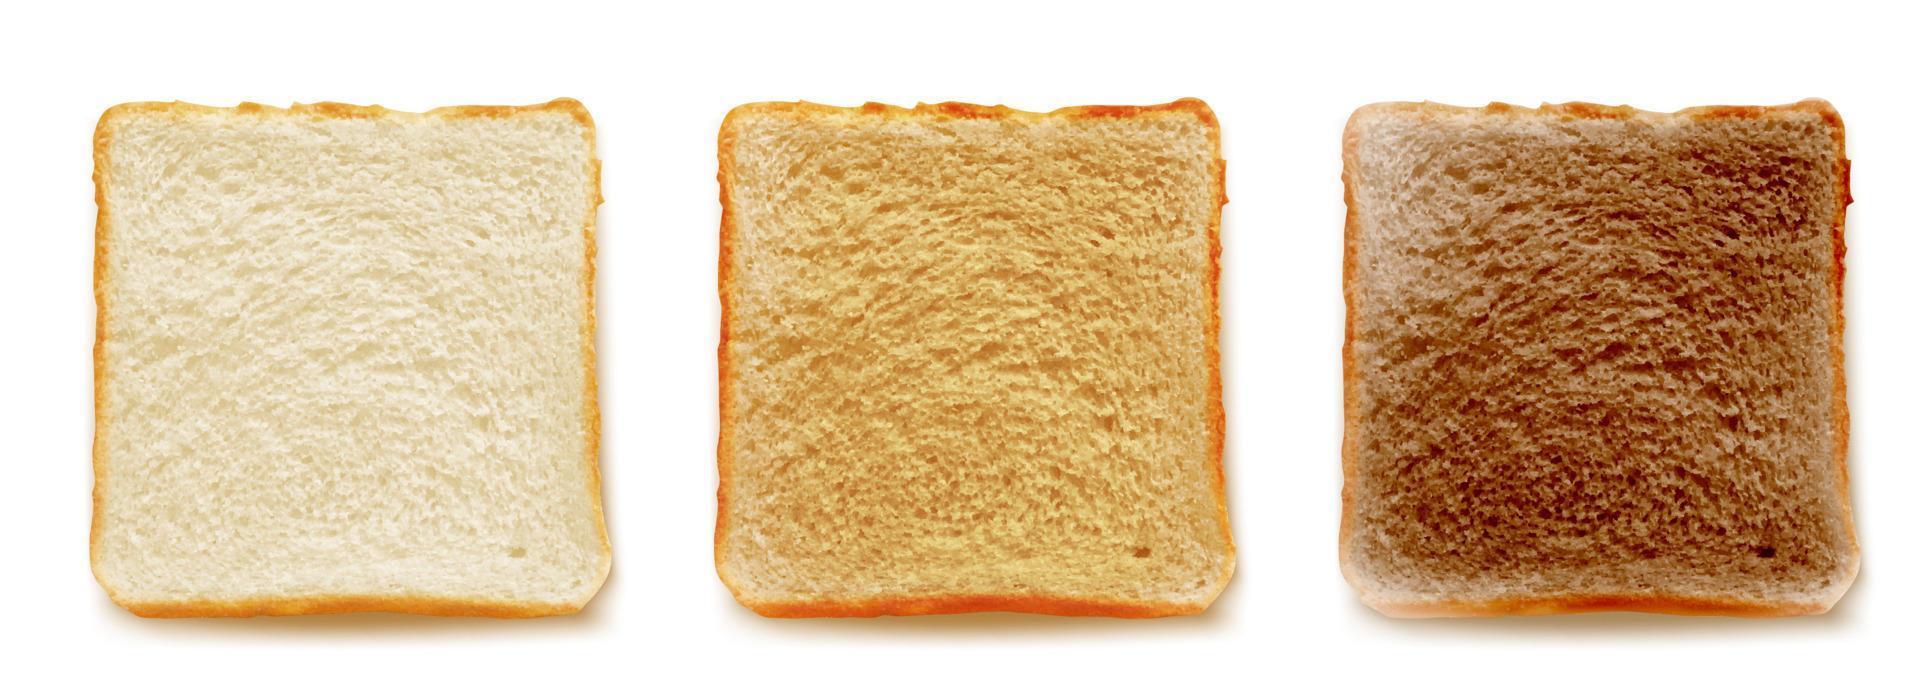 Toasted bread for sandwich 3D isolated vector